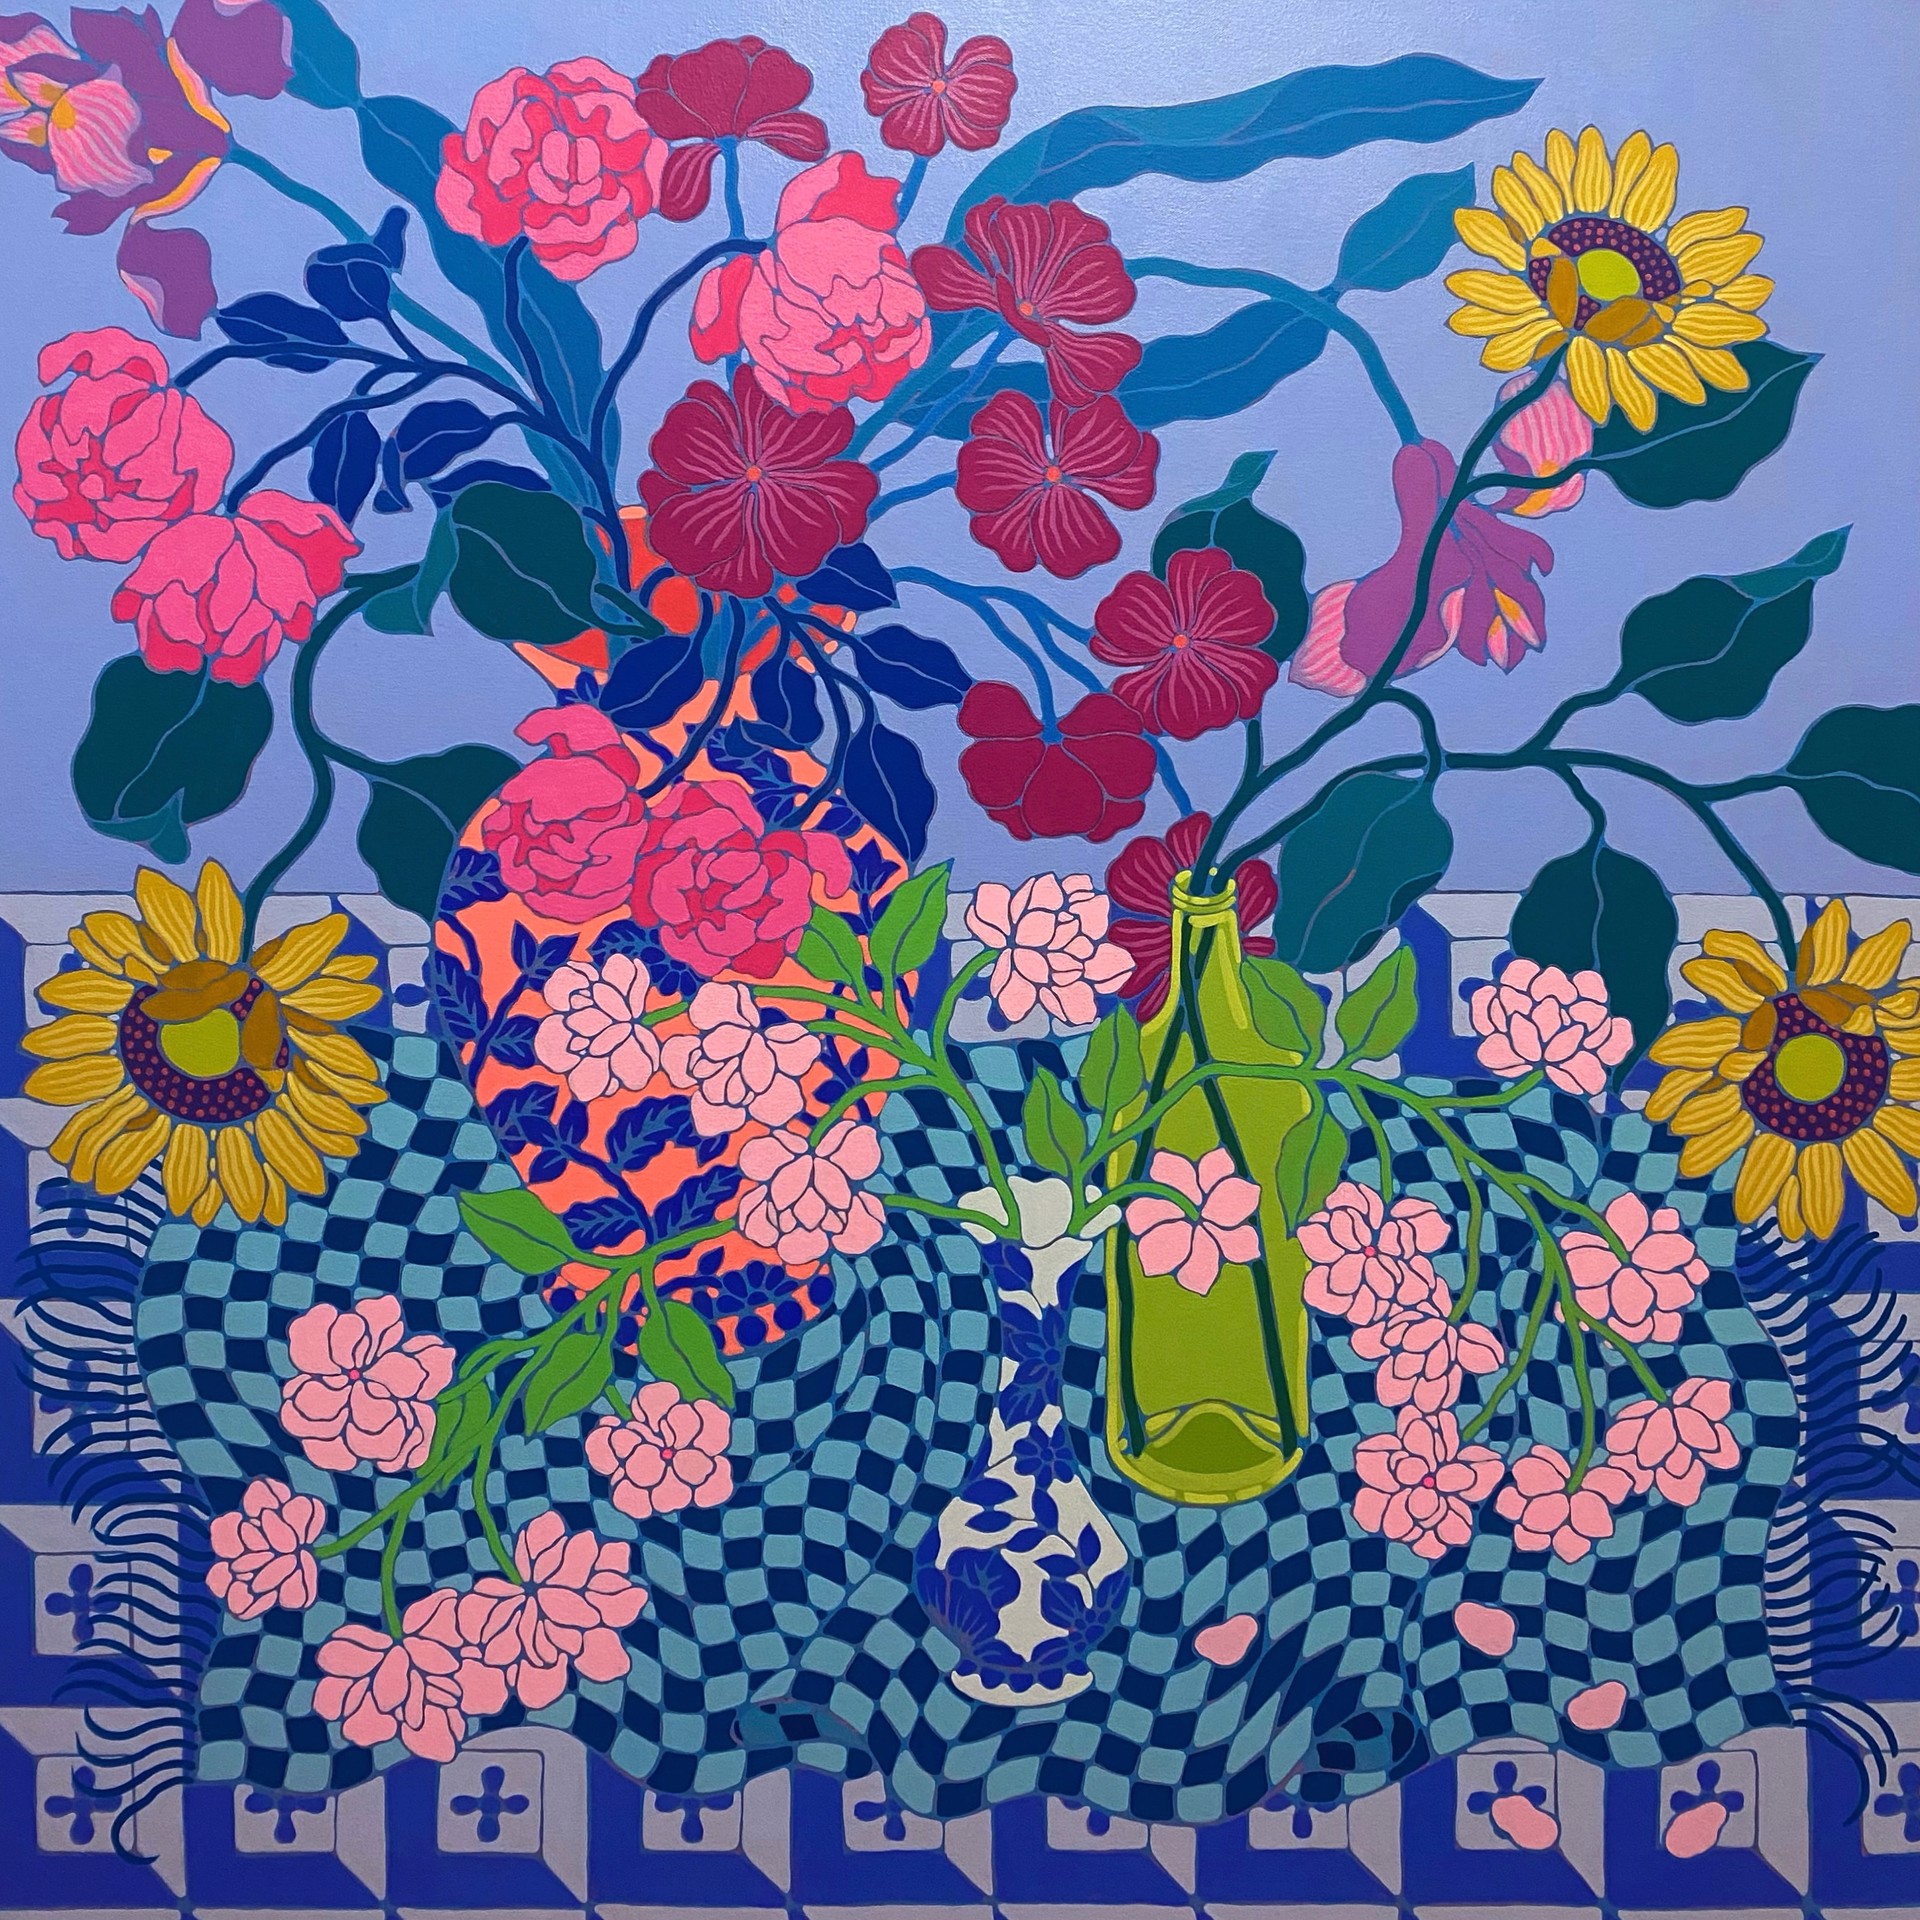 Three Bouquets on Picnic Blanket by Sarah Ingraham